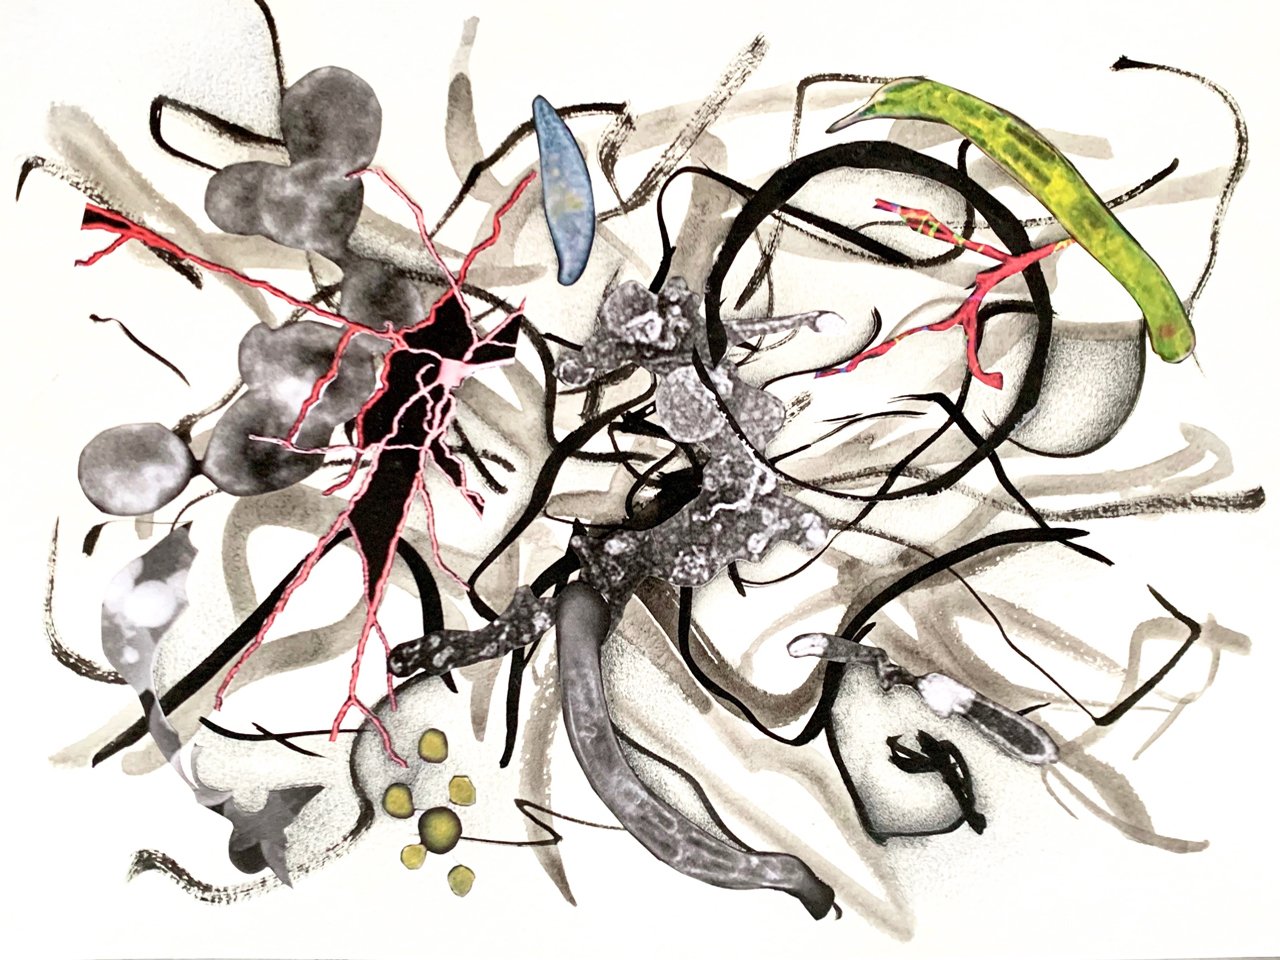   Brains 0915 ,  2021, graphite, India ink, printer ink and paper on paper, 9"x12"  